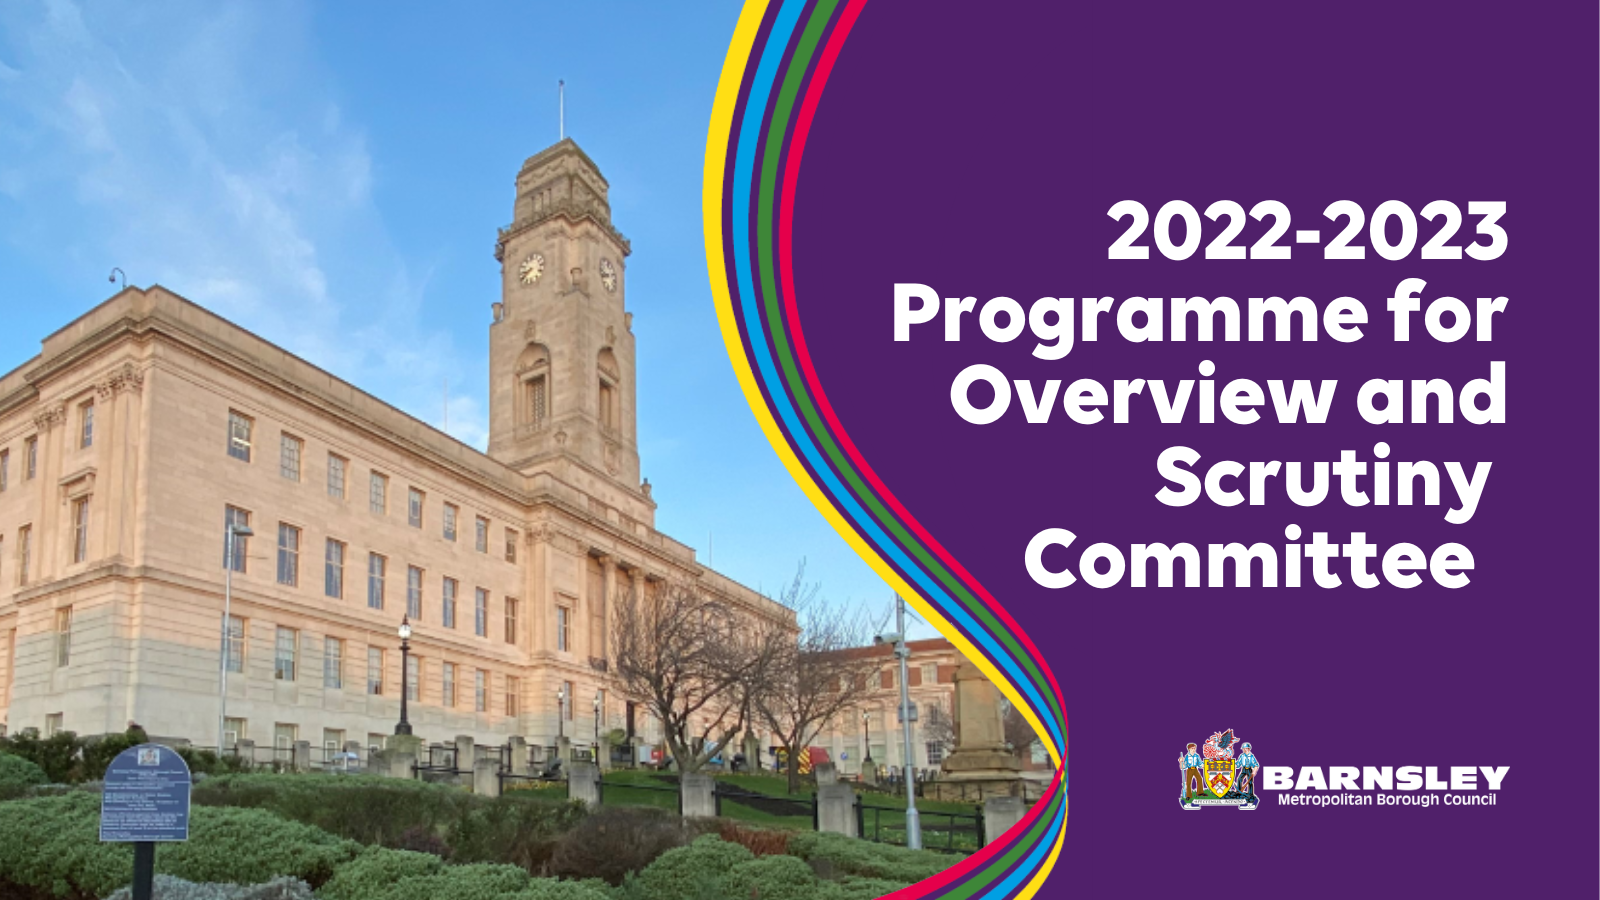 2022-2223 Programme for Overview and Scrutiny Committee.png